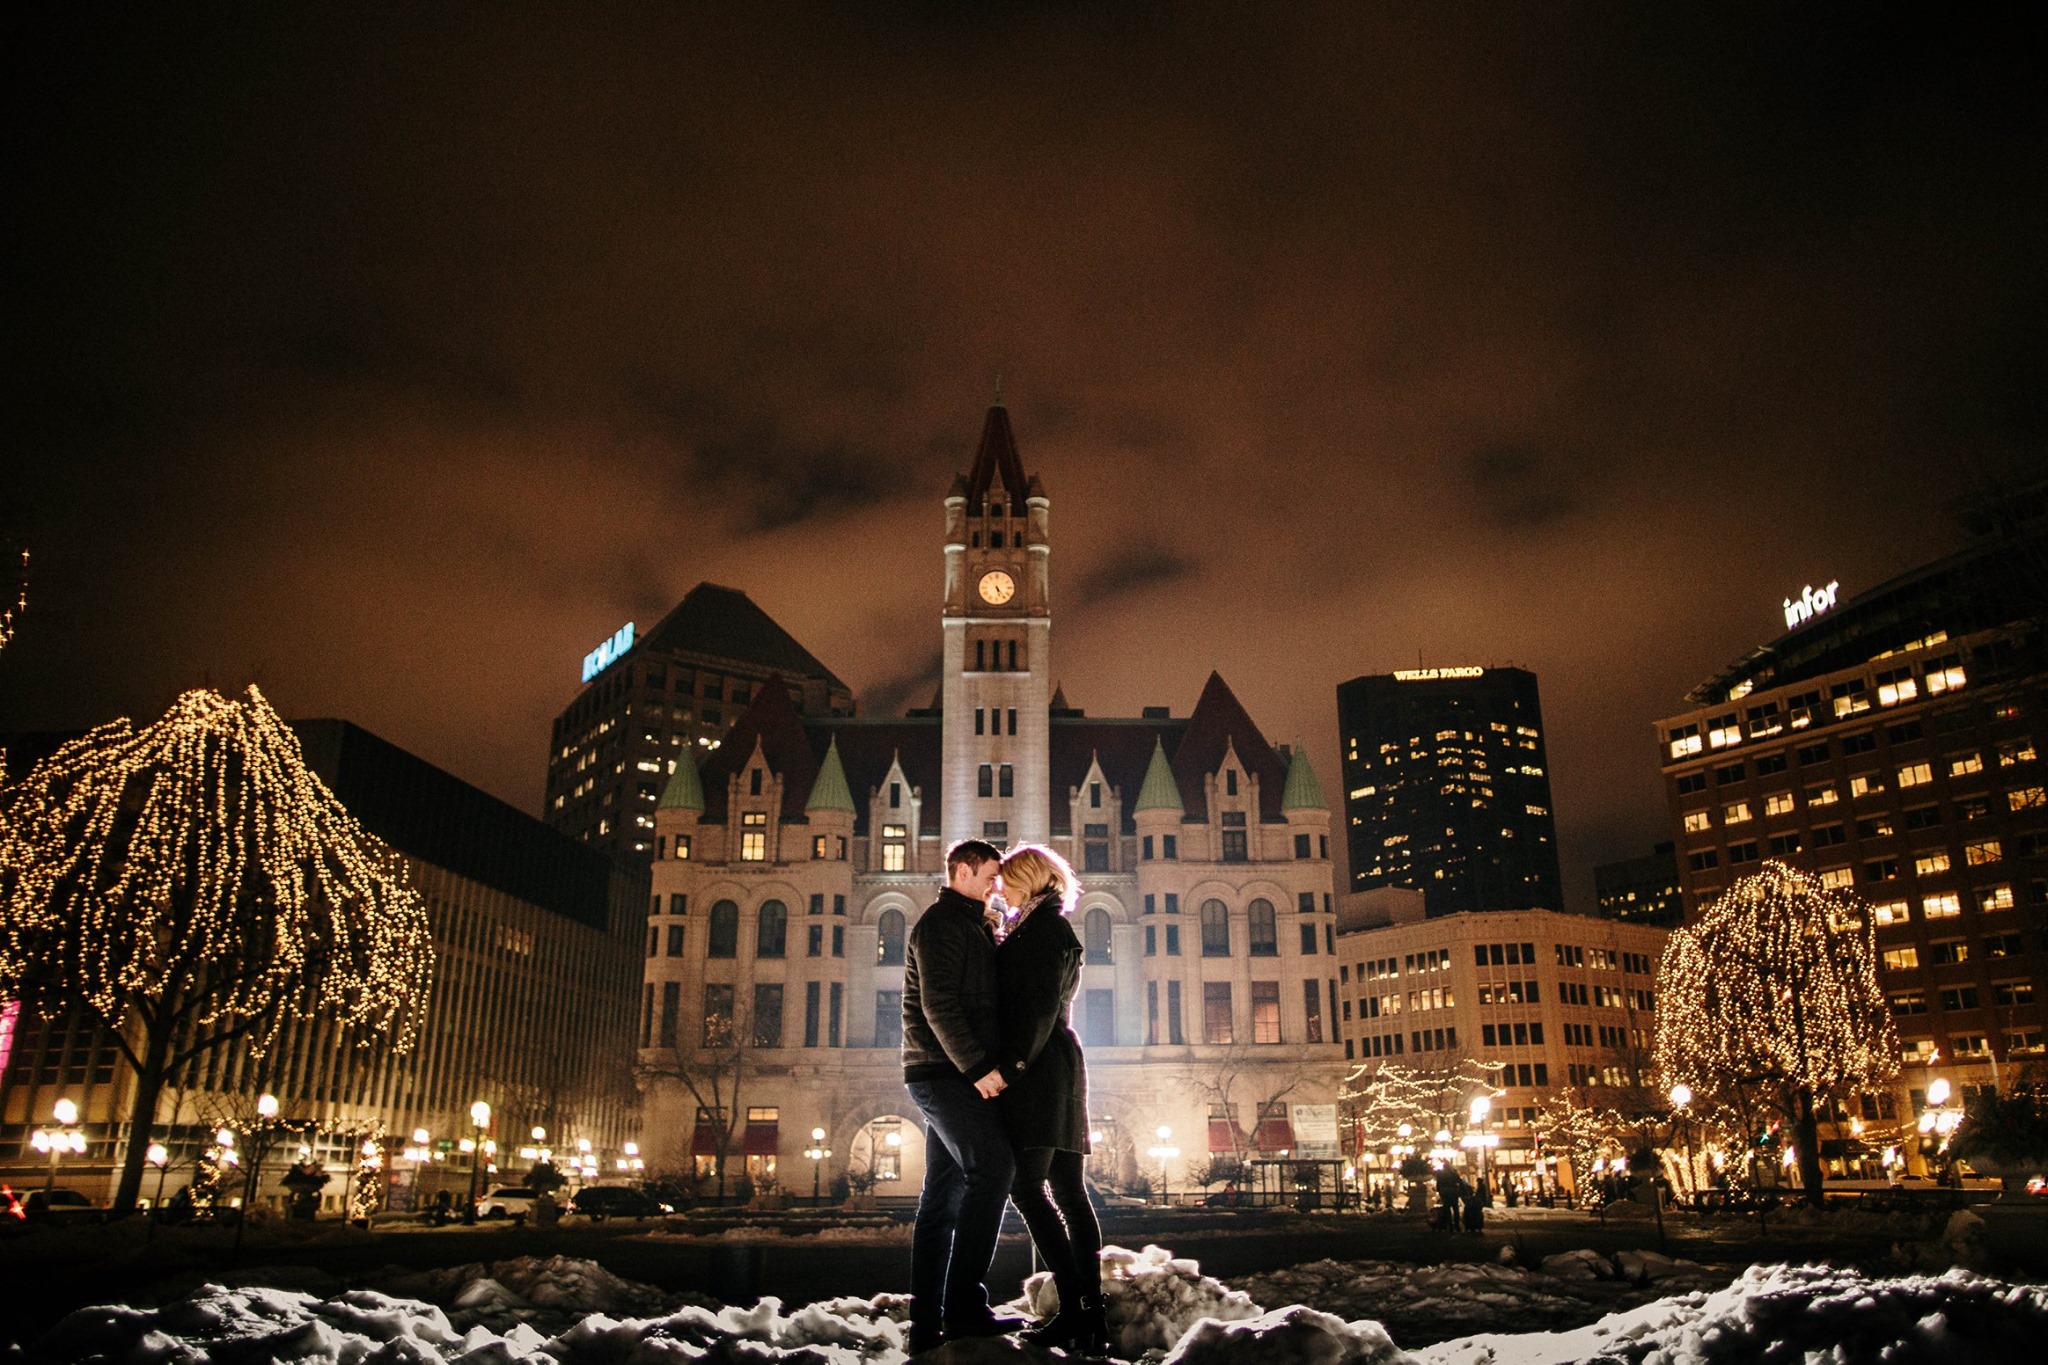 A couple standing in front of a clock tower during the night time while holding hands